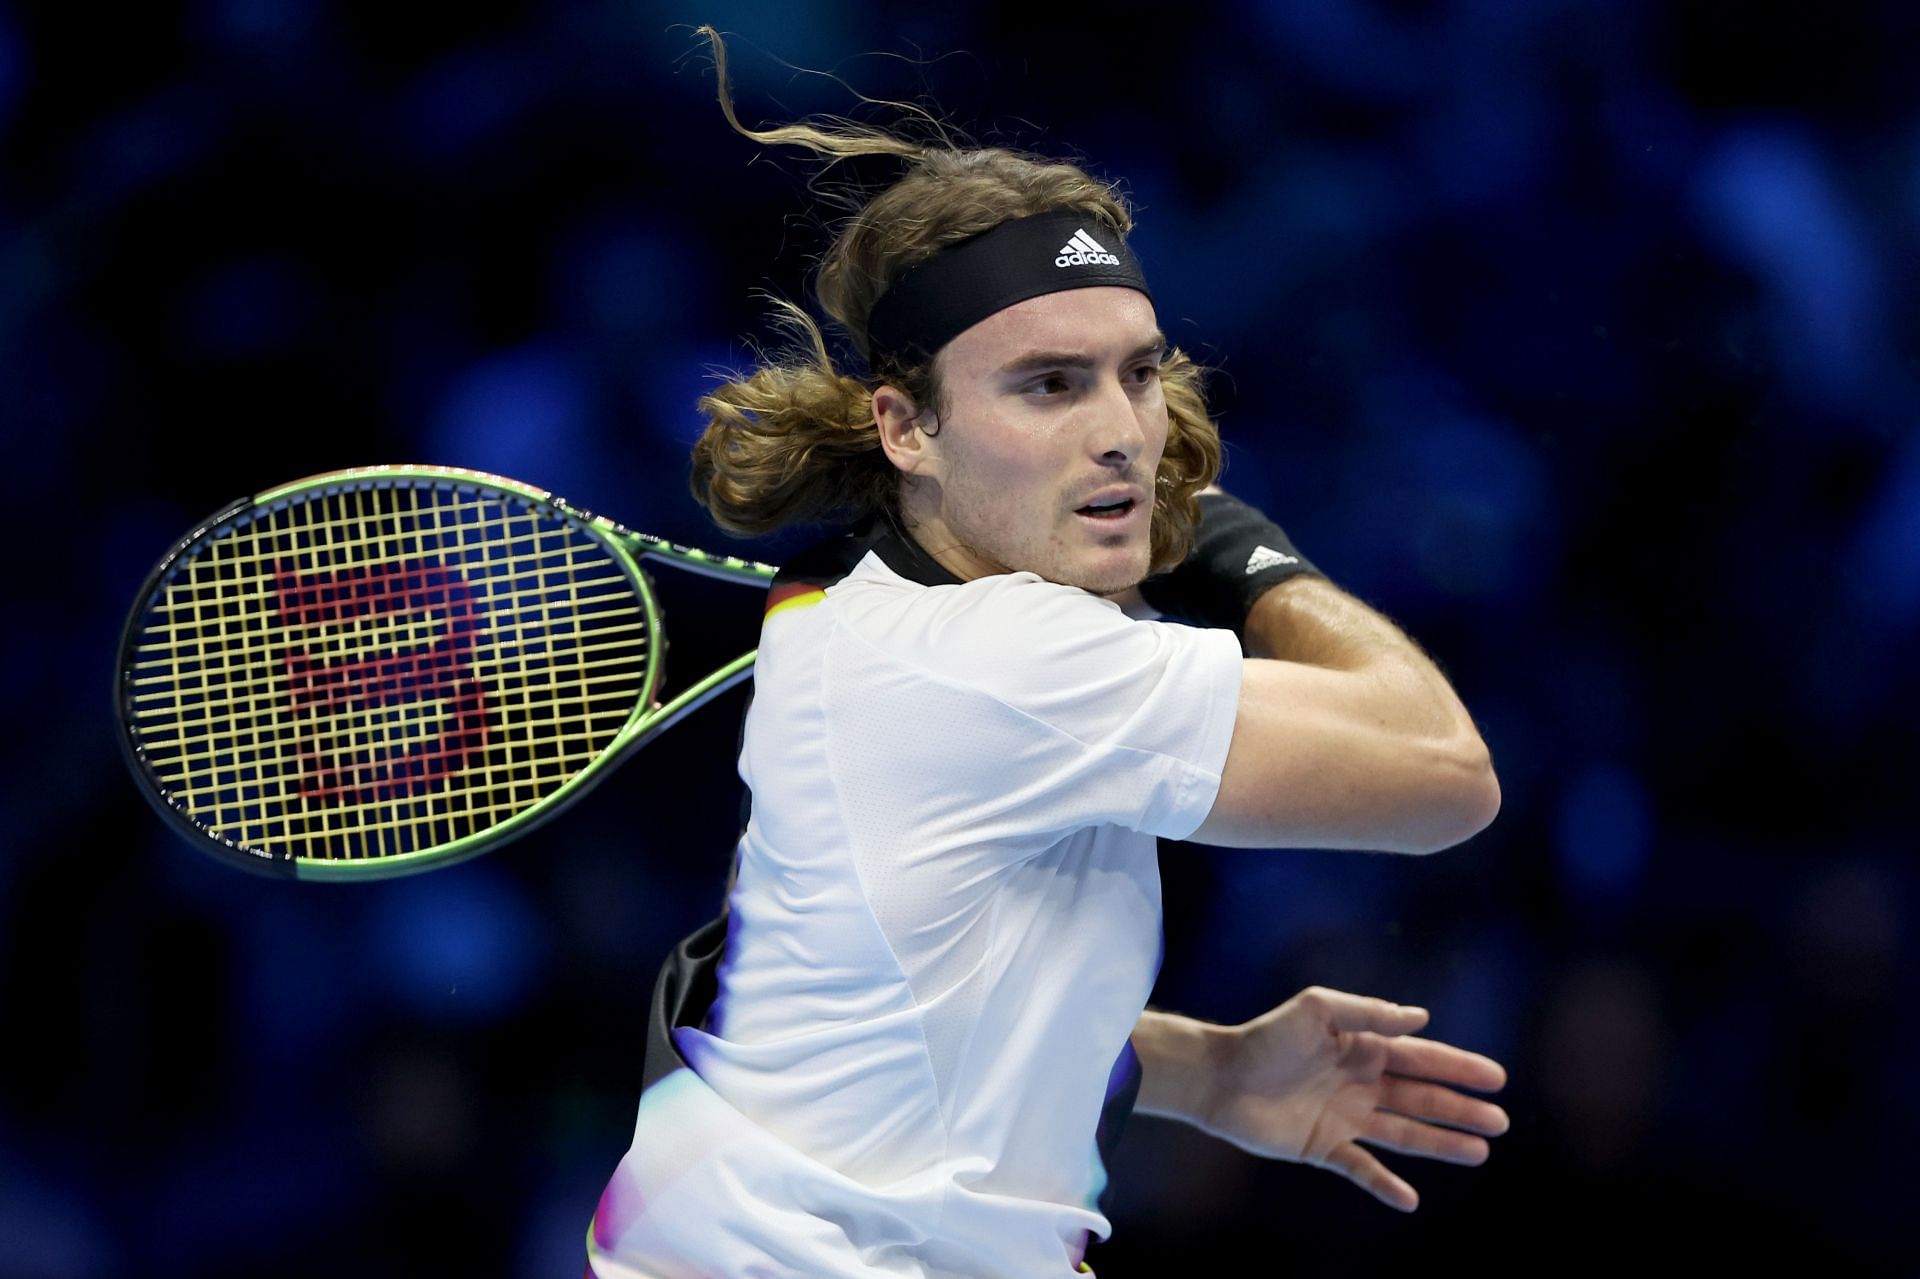 Stefanos Tsitsipas in action at the 2022 ATP Finals.